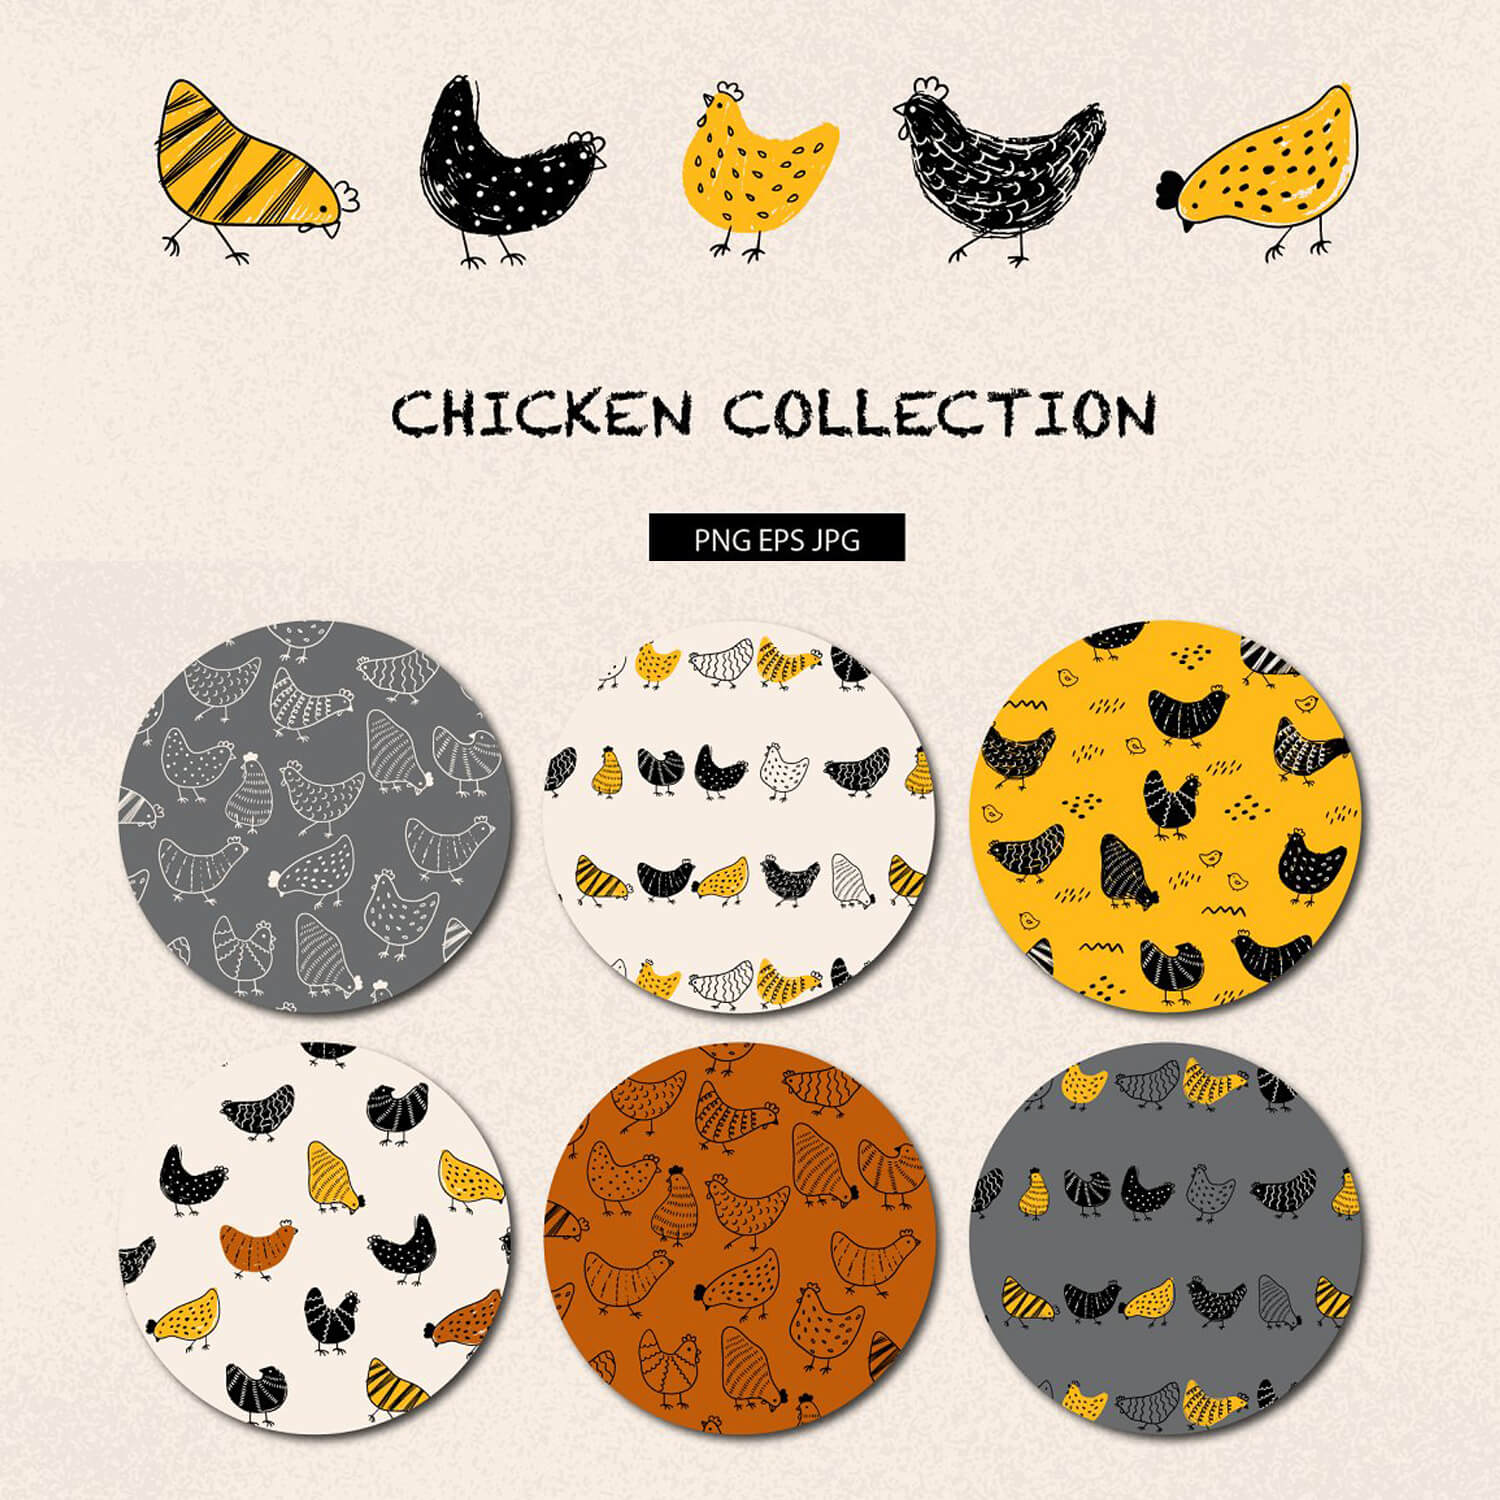 Plates decorated with a collection of chicken designs.